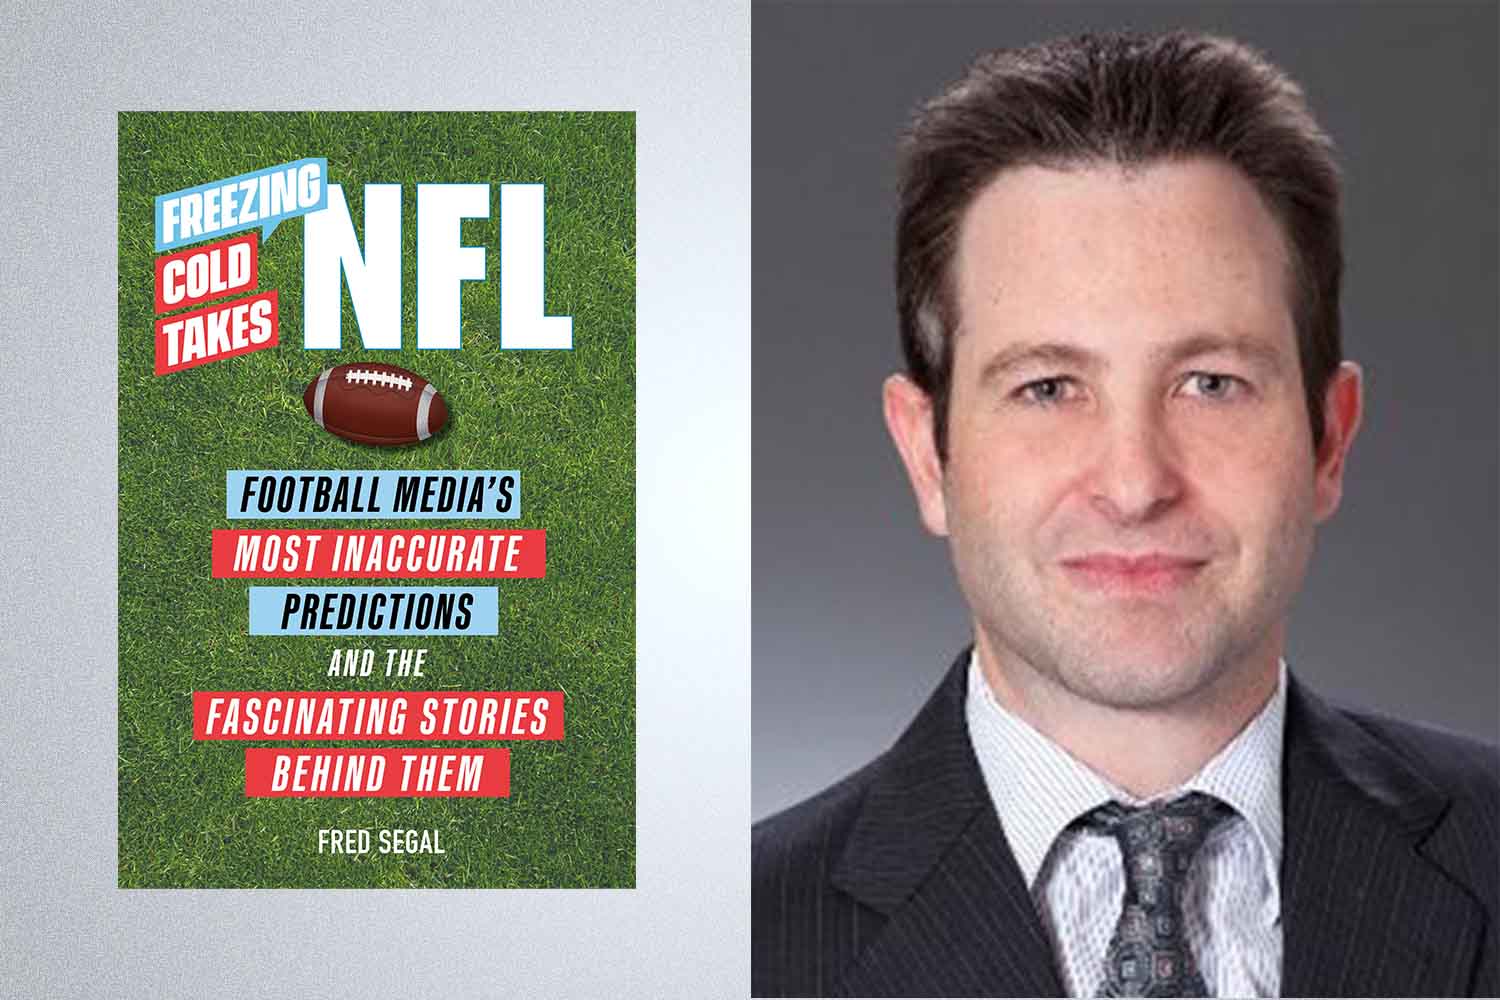 The new "Freezing Cold Takes" book and author Fred Segal